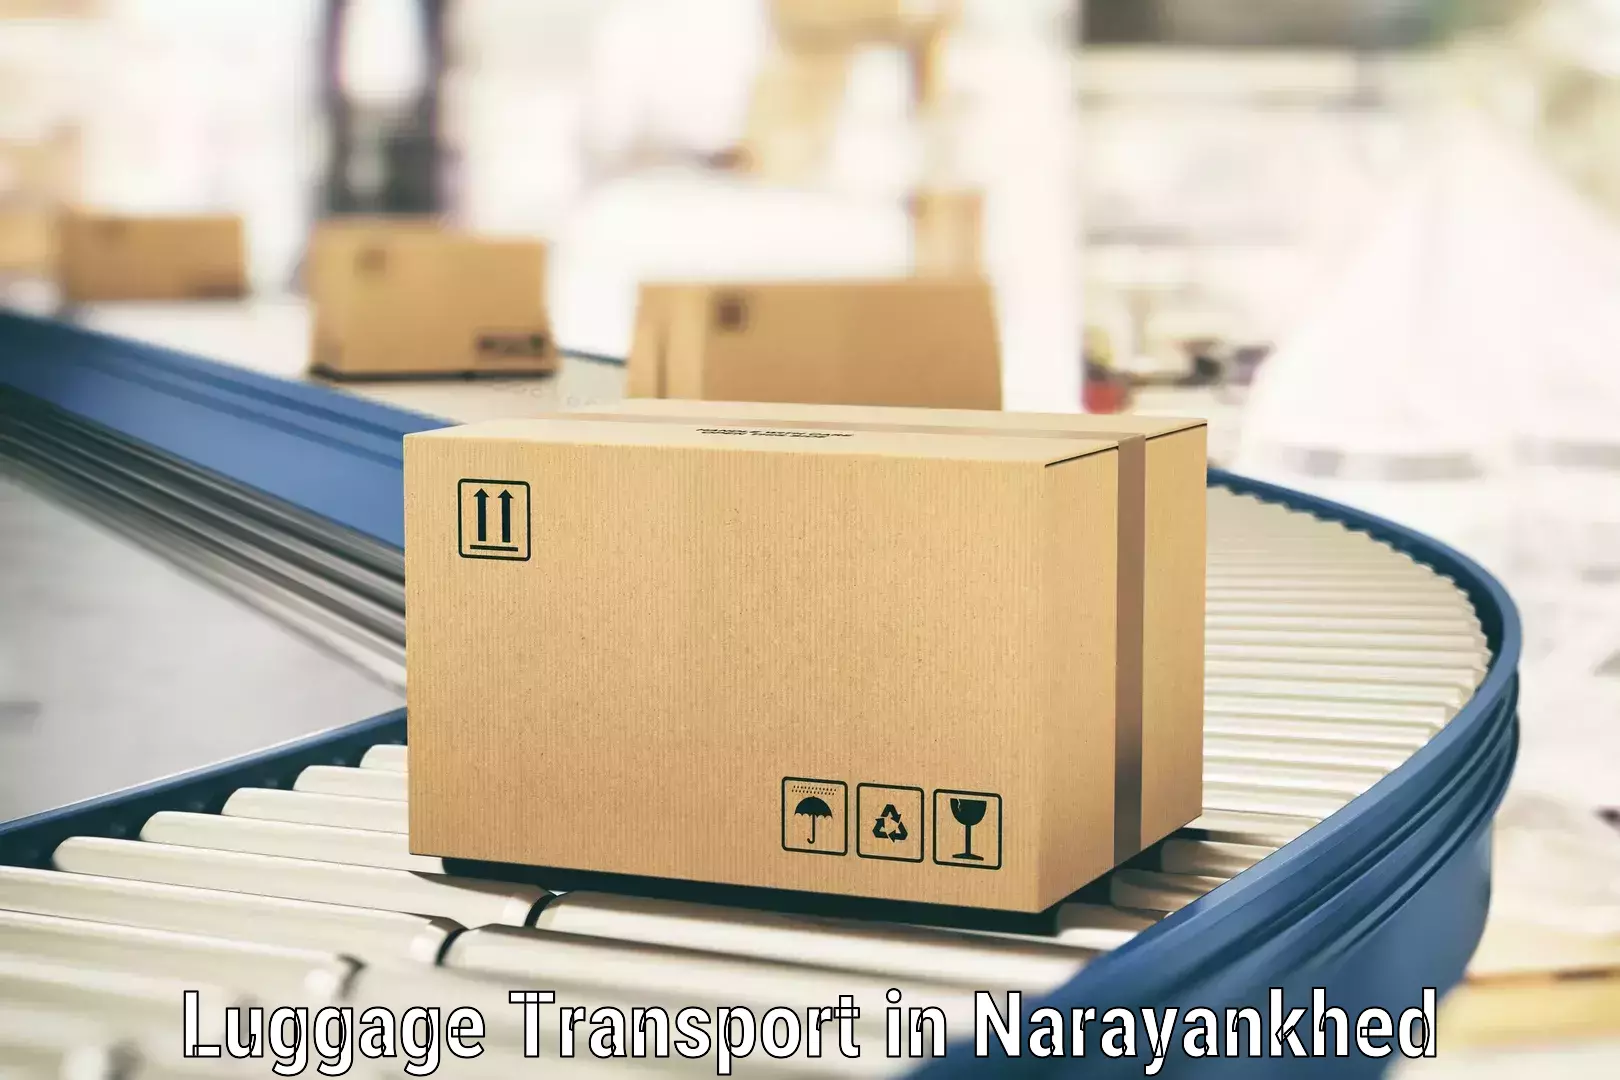 Professional baggage transport in Narayankhed